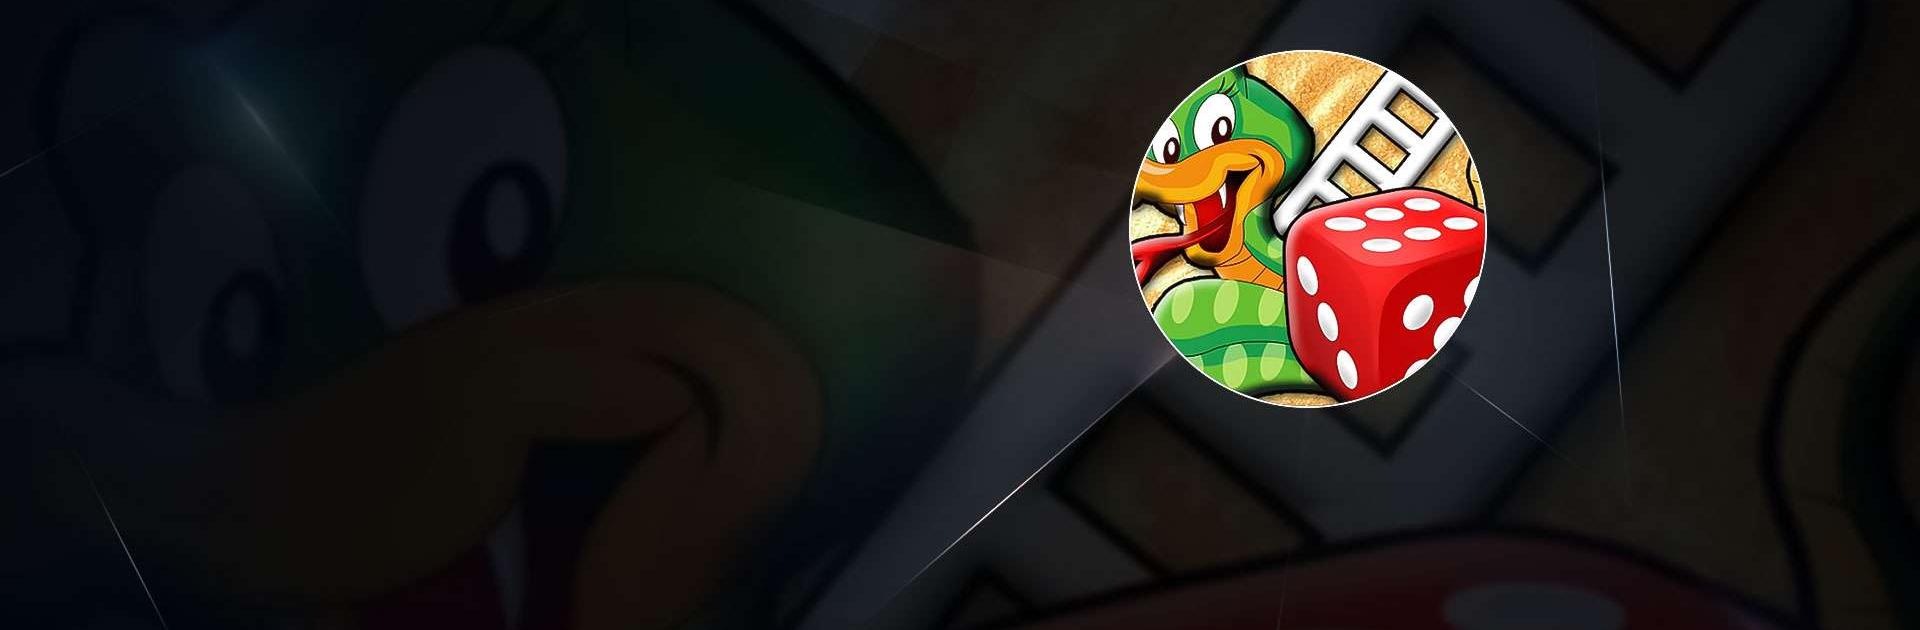 Snakes & Ladders King - Apps on Google Play